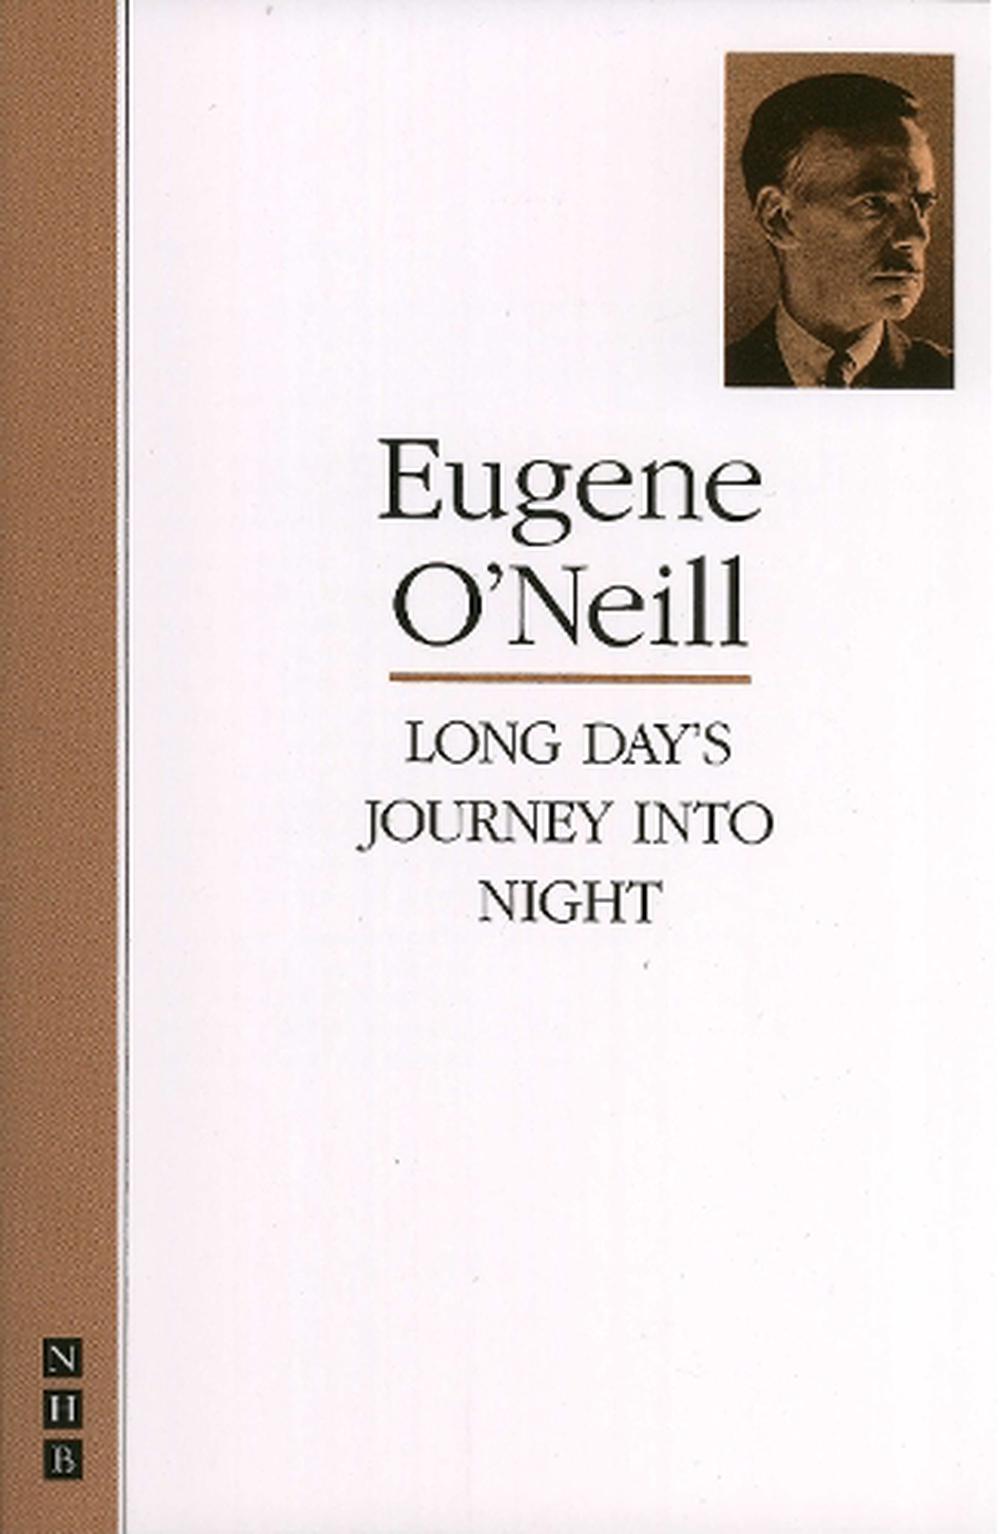 long journey's day into night